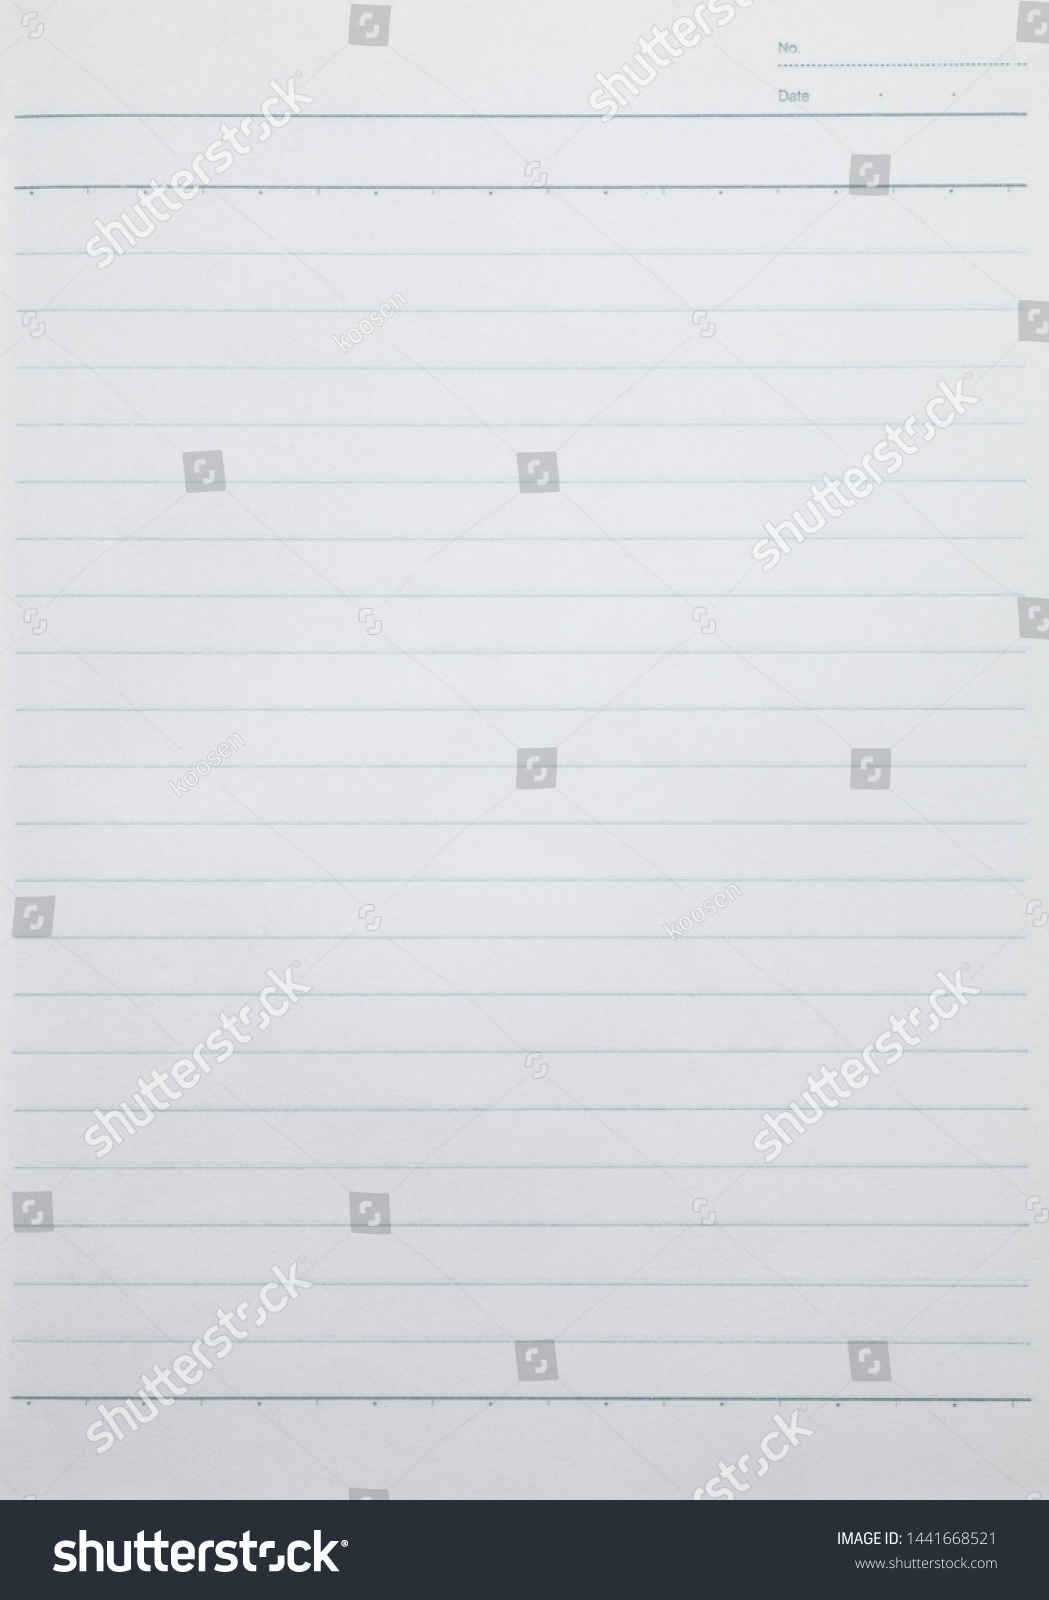 Lined Sheet Paper Blank Half Writing Printable Template Within Blank Letter Writing Template For Kids